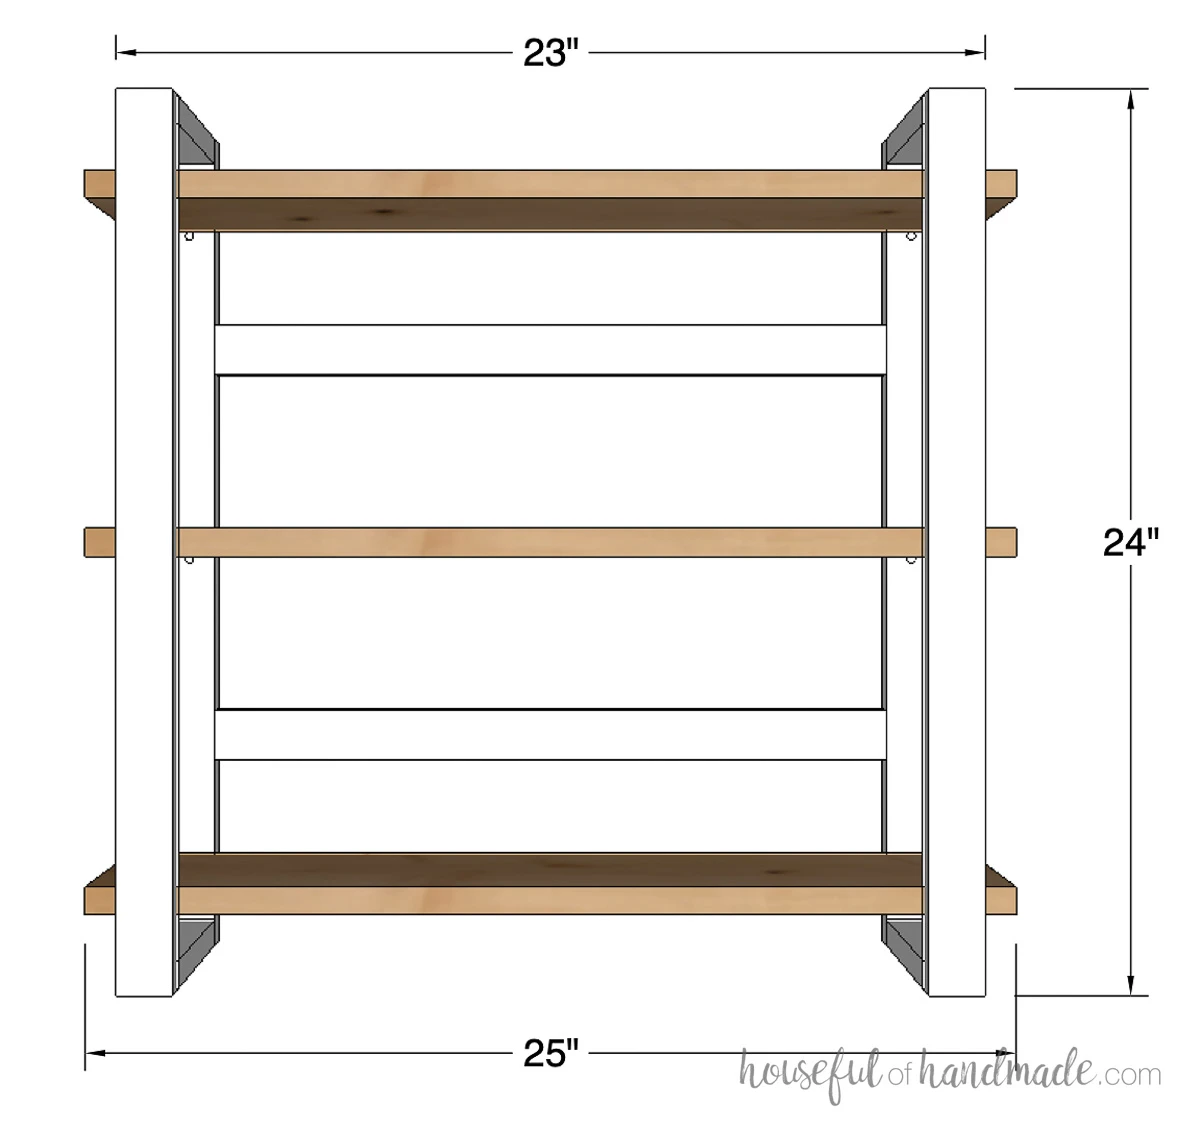 3D sketch of wall shelf with dimensions noted.